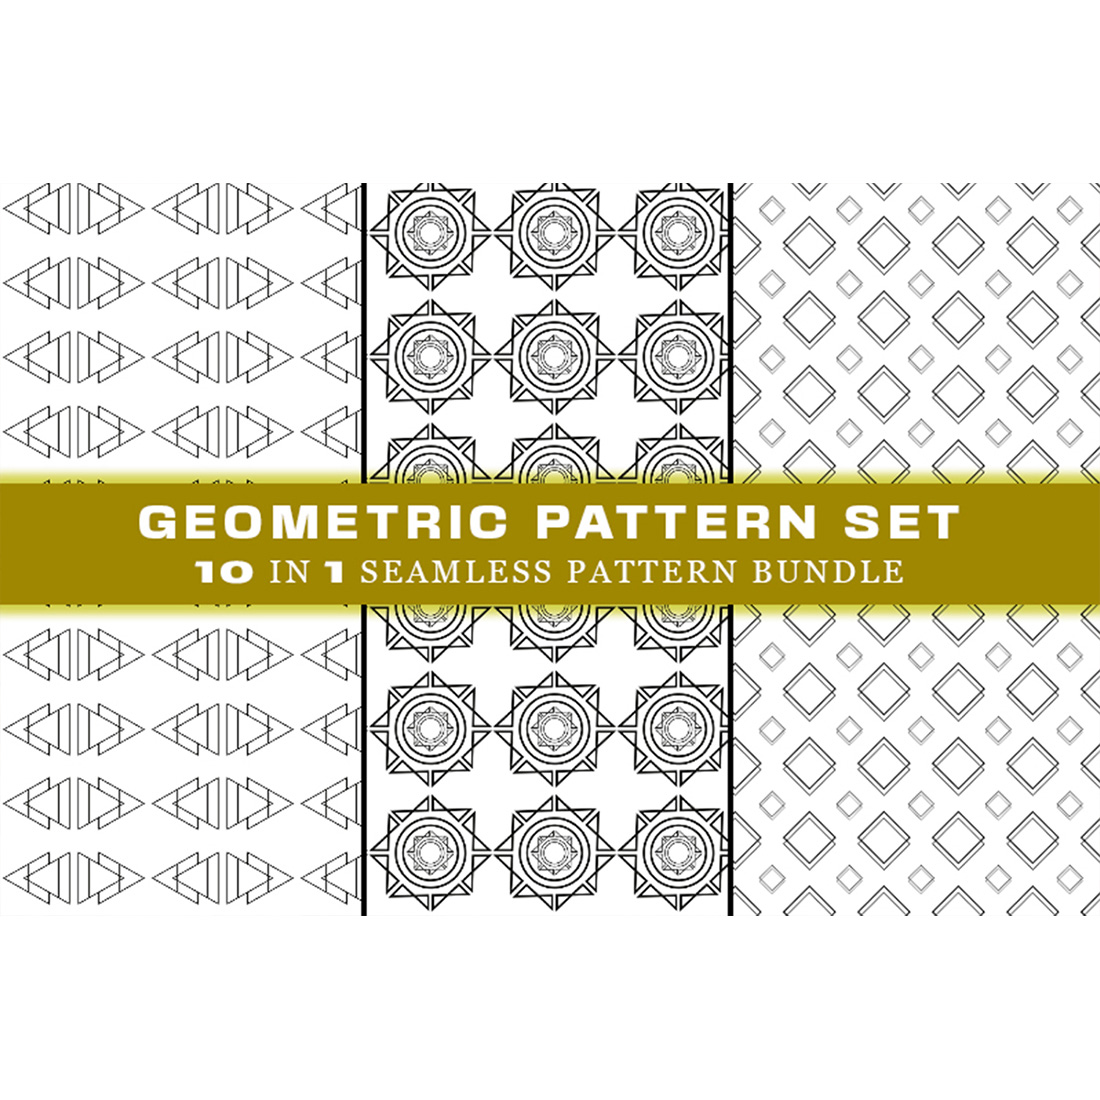 Set of images of exquisite geometric patterns